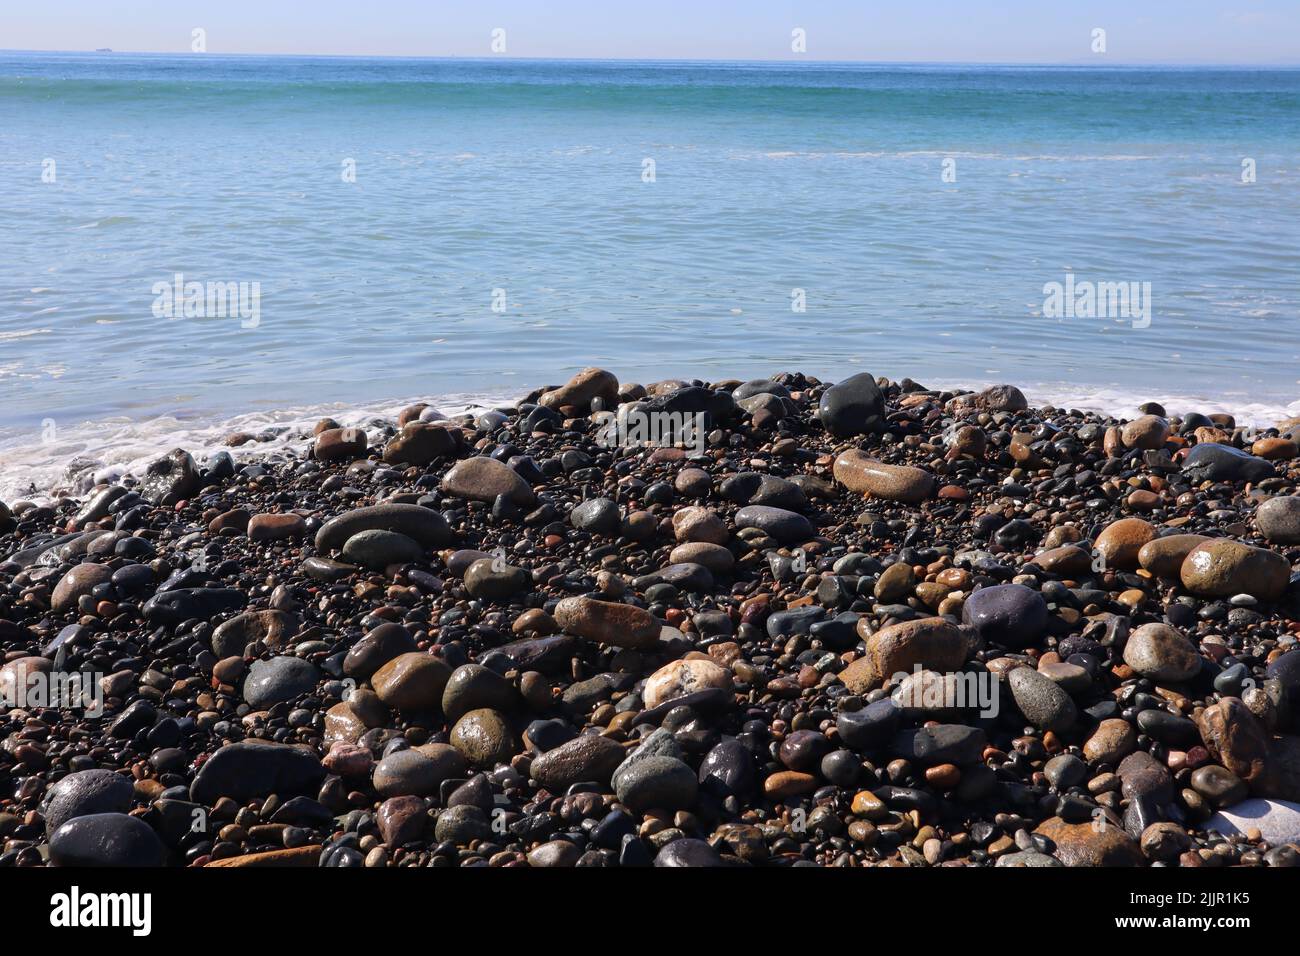 A natural view of the rocky beach in San Clemente, California, USA Stock Photo